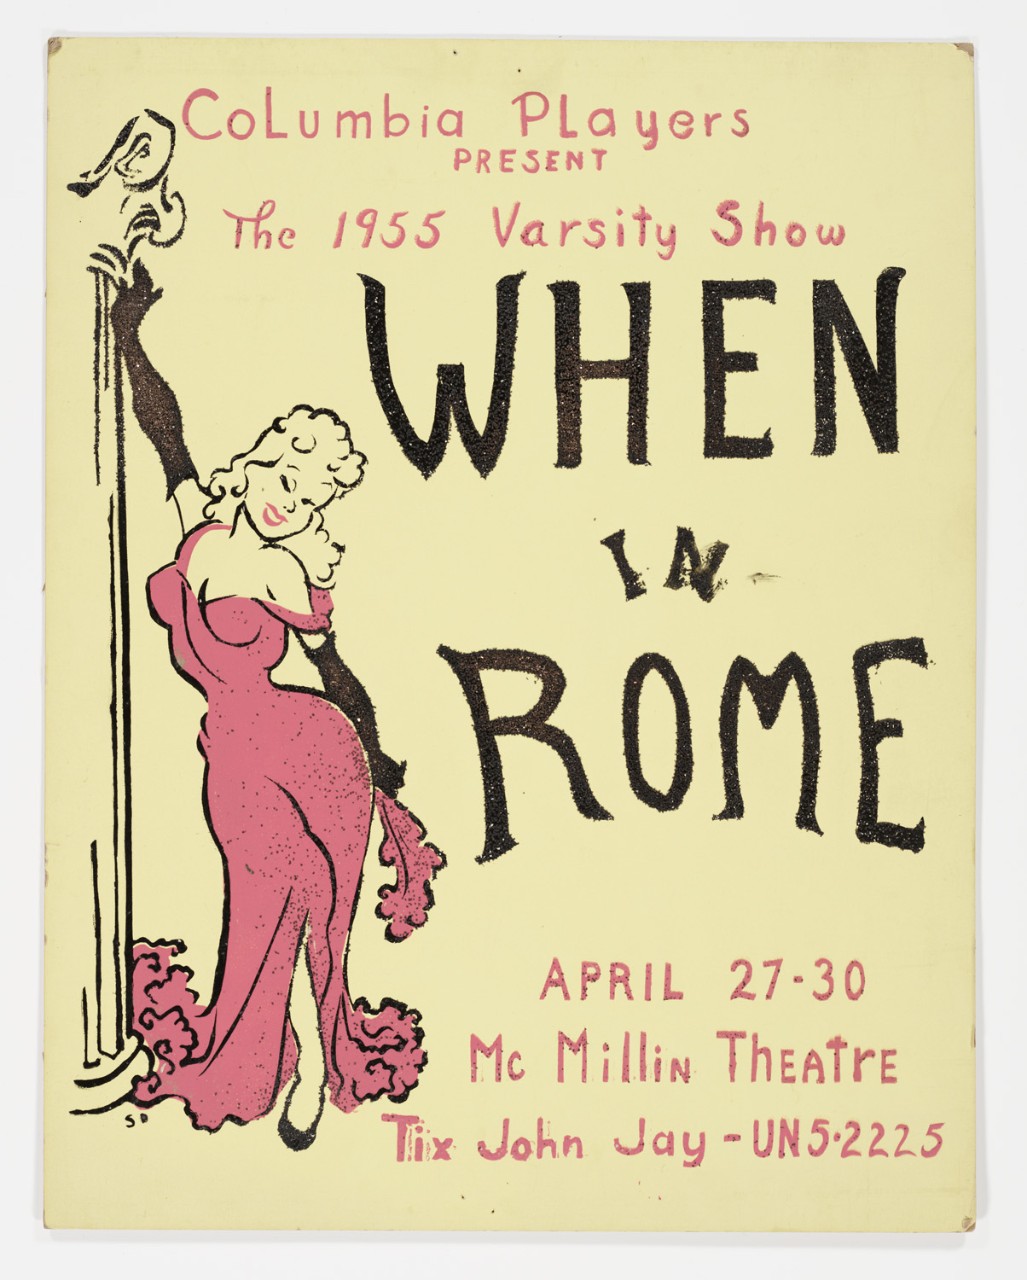 Original poster for 1955 Varsity Show "When in Rome"